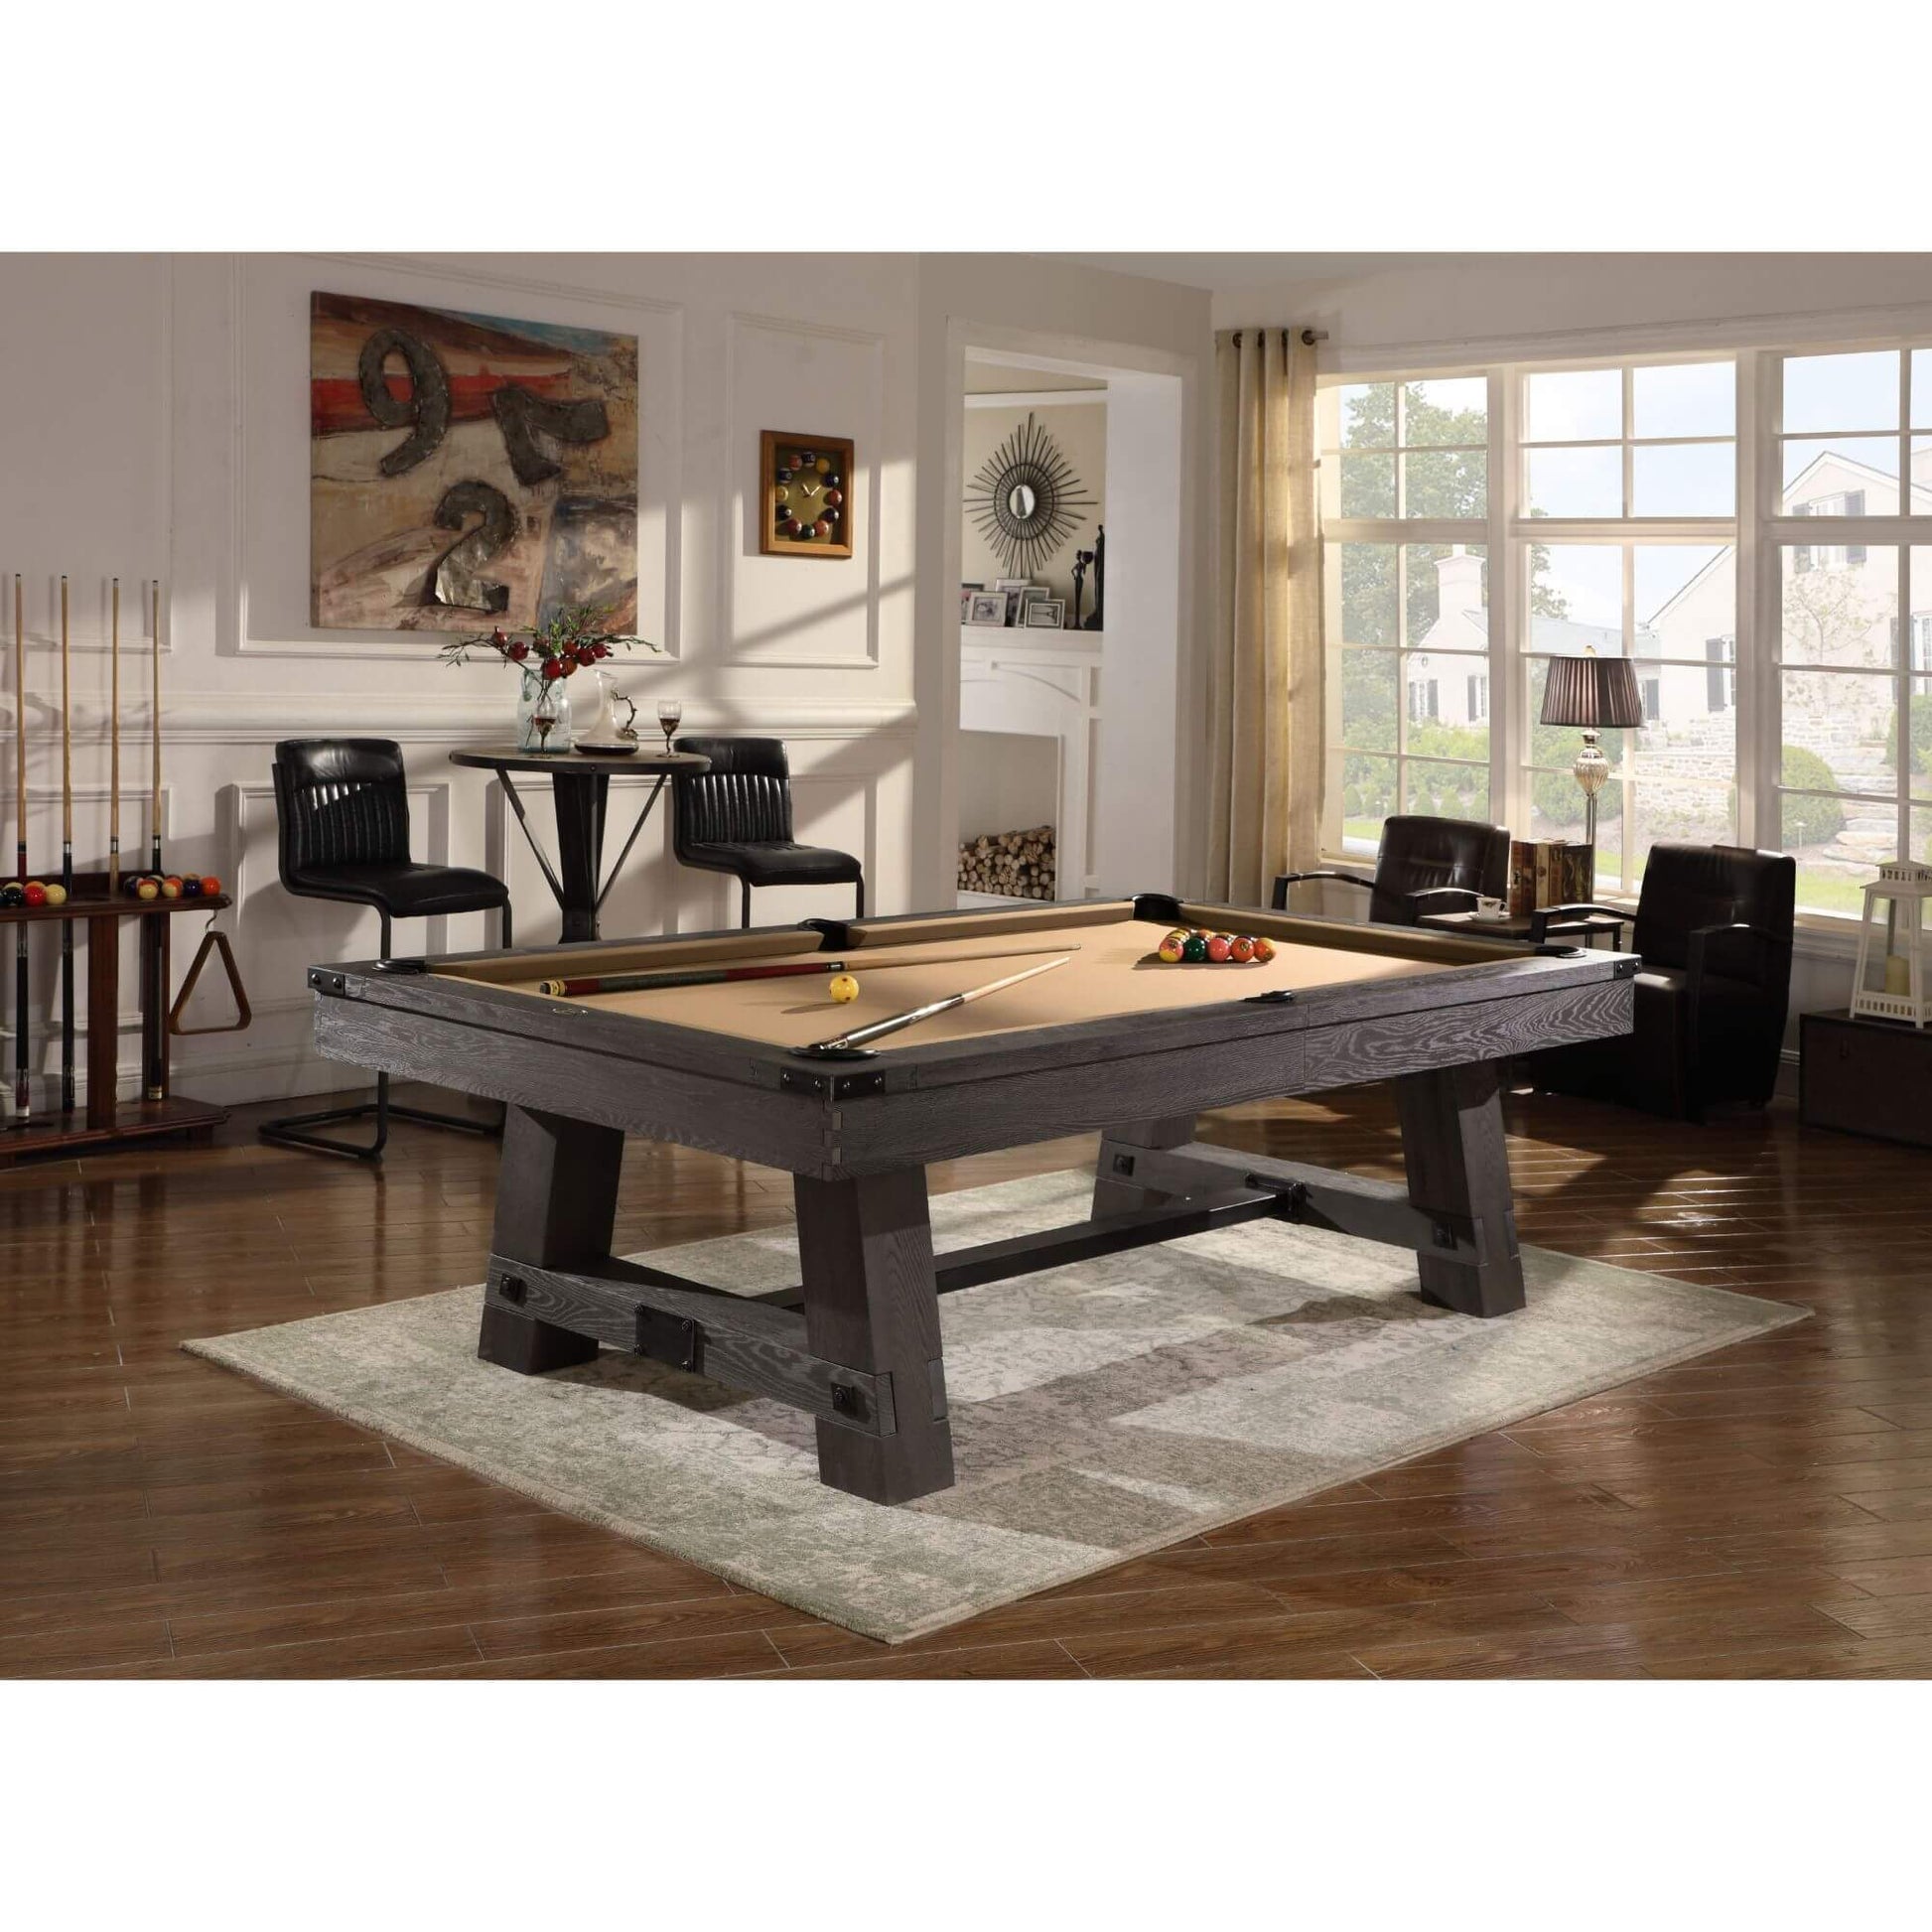 Playcraft Yukon River Slate Pool Table with Optional Dining Top - Upper Livin